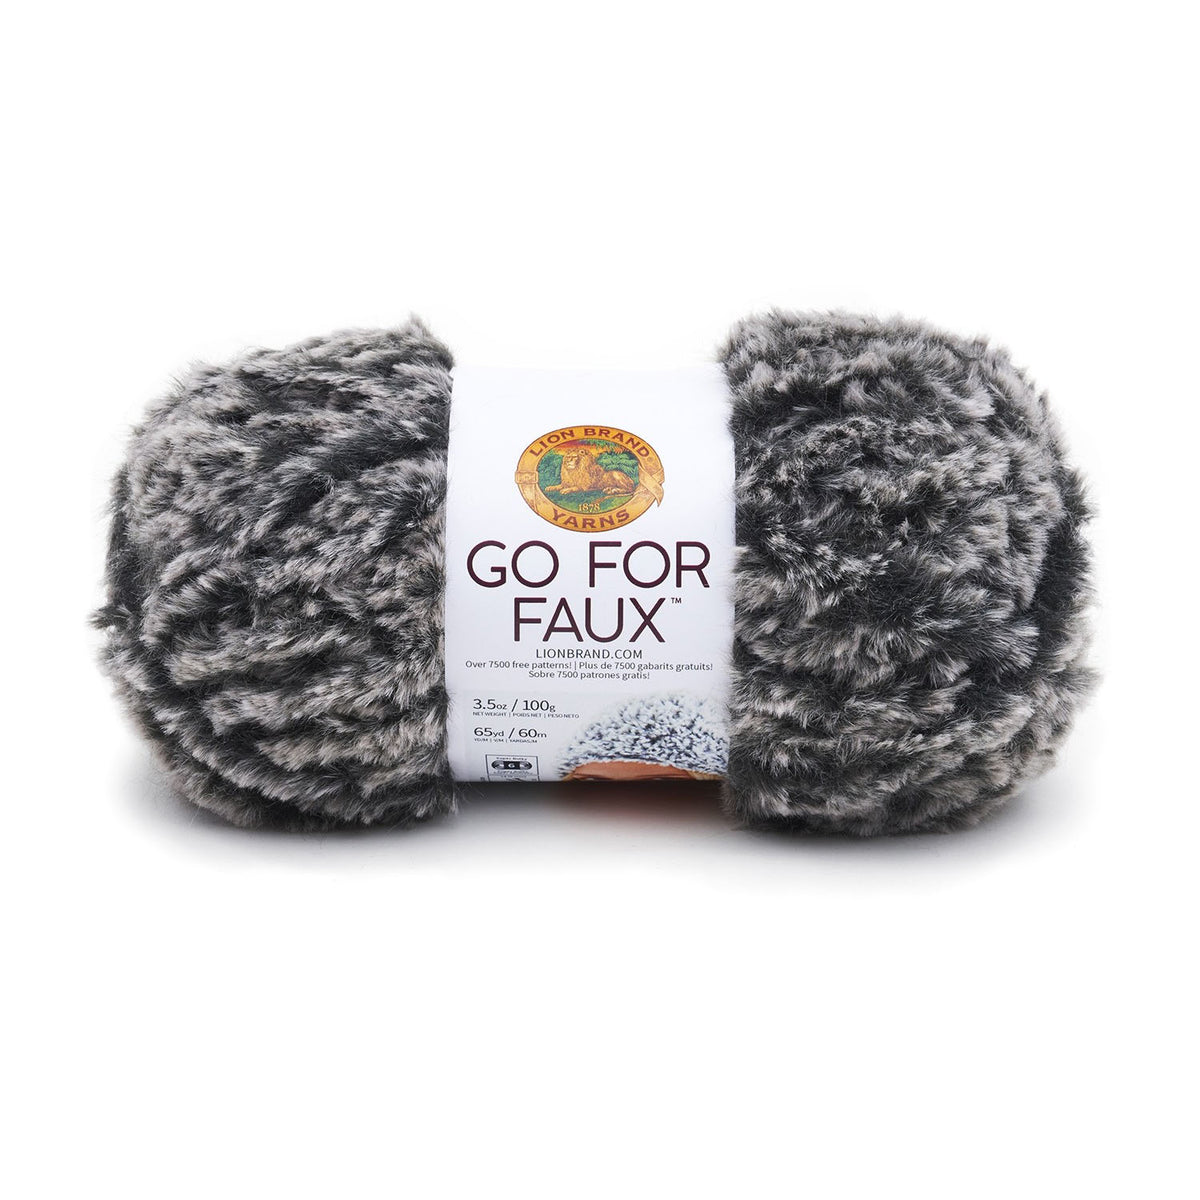 Lion Brand Fawn Go For Faux Thick & Quick Yarn - Small Ball (7 - Jumbo),  Free Shipping at Yarn Canada